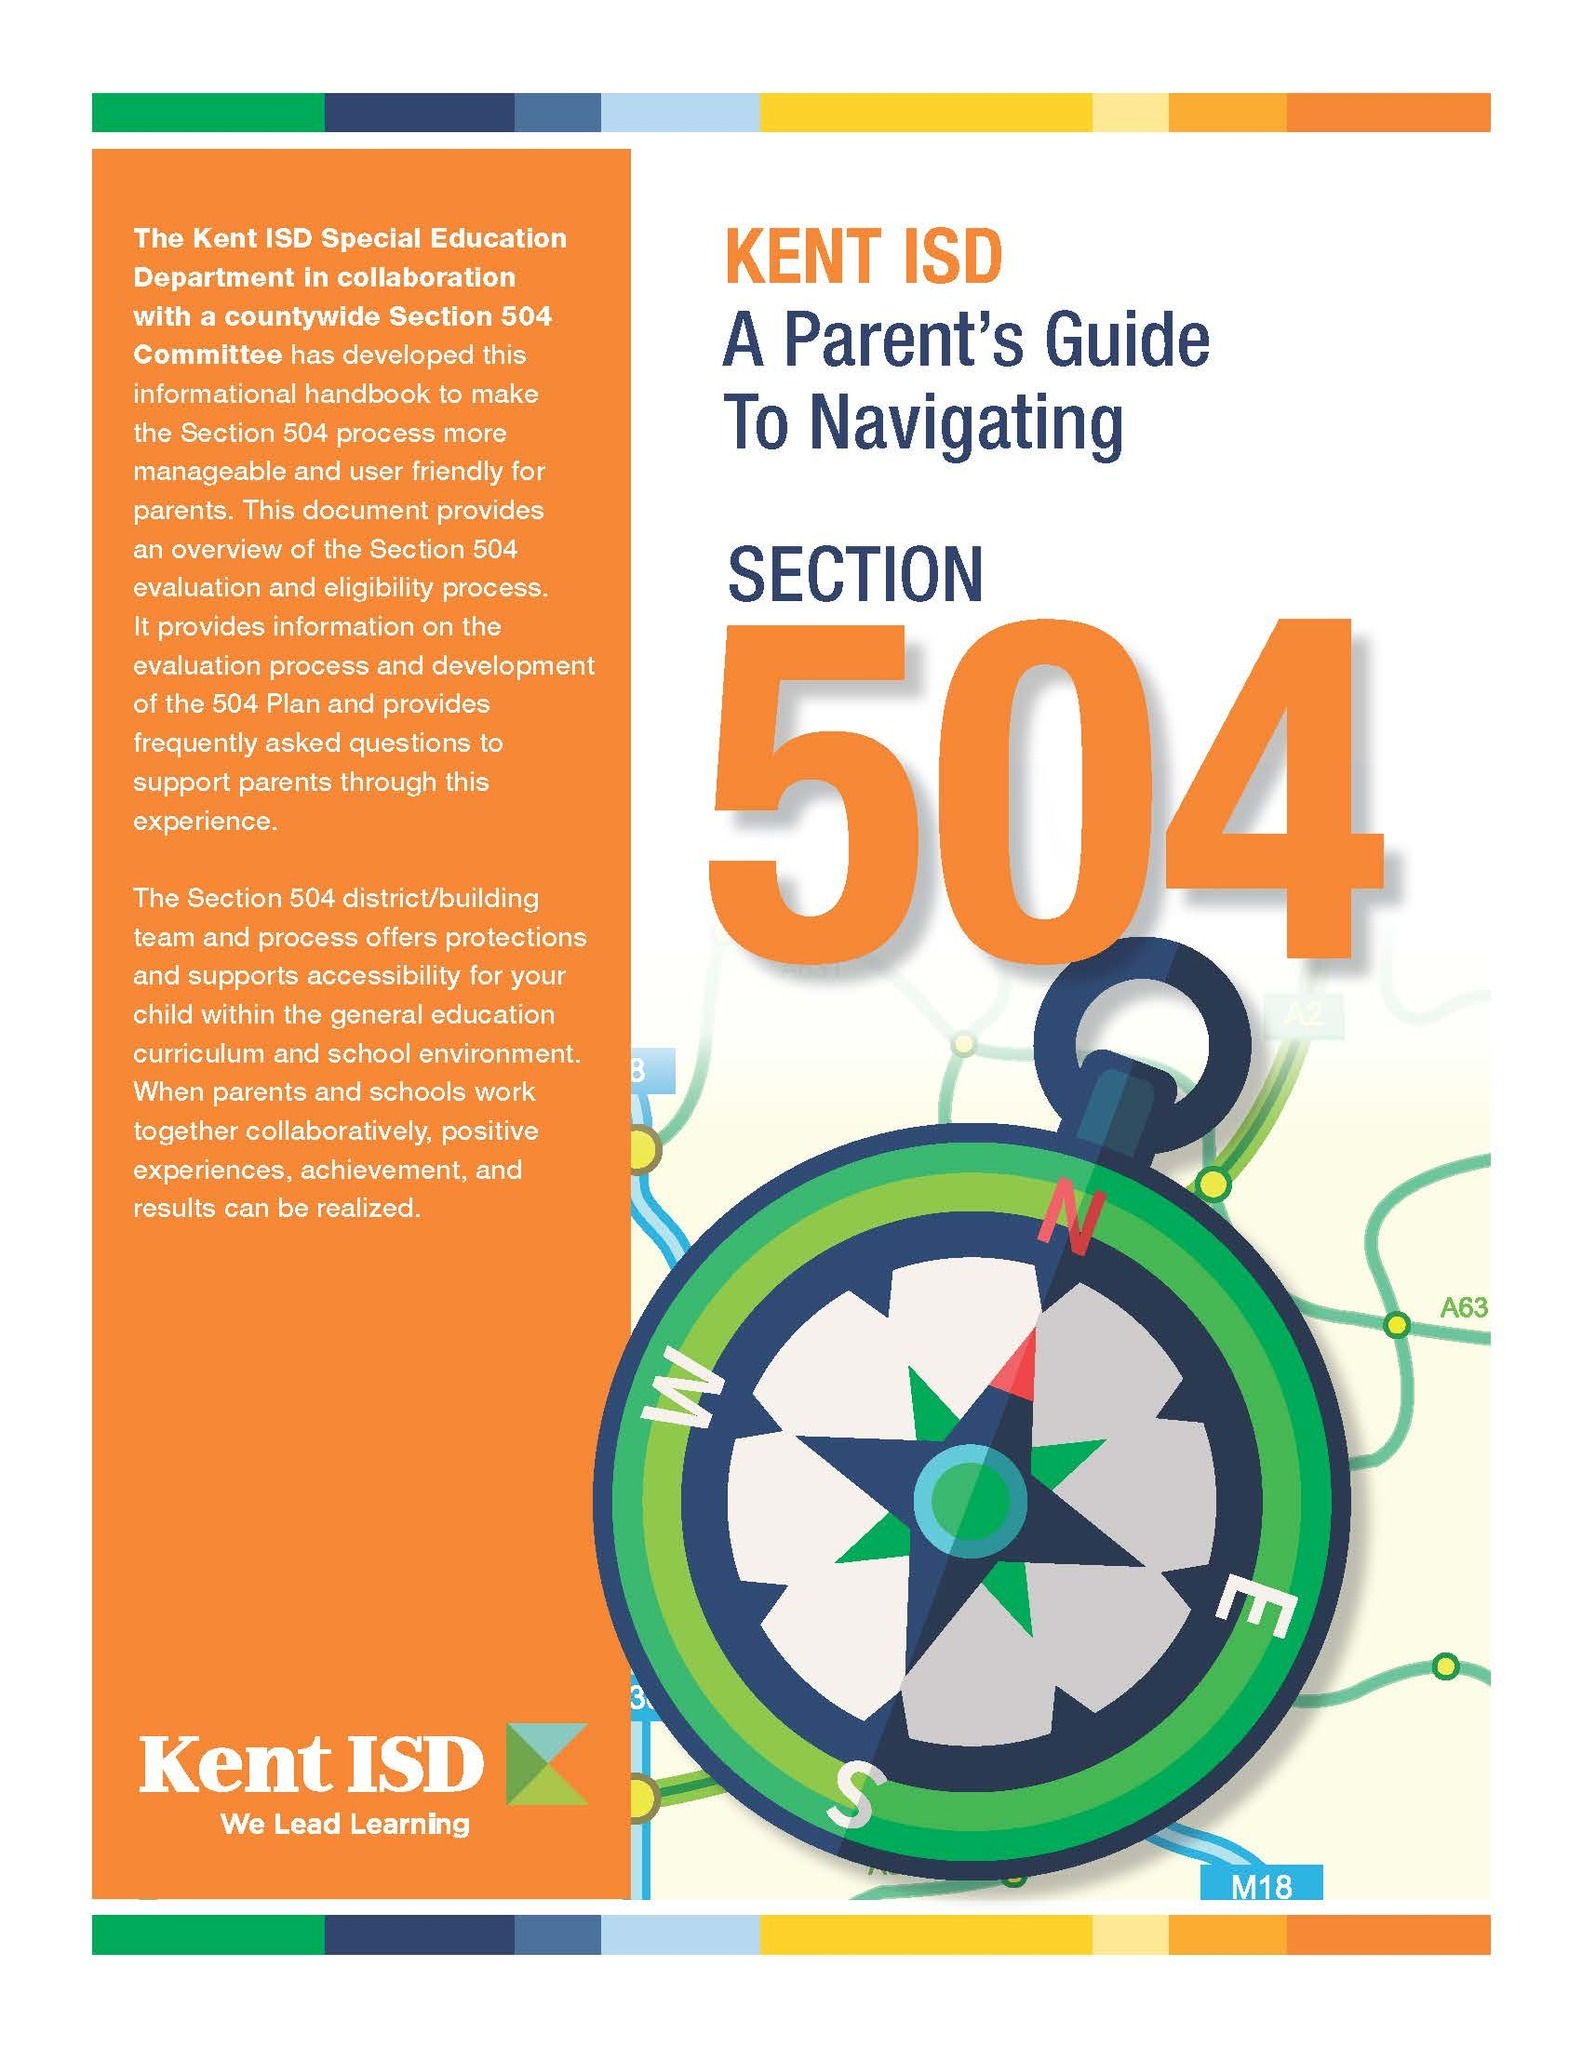 A Parent's Guide to Navigating Section 504